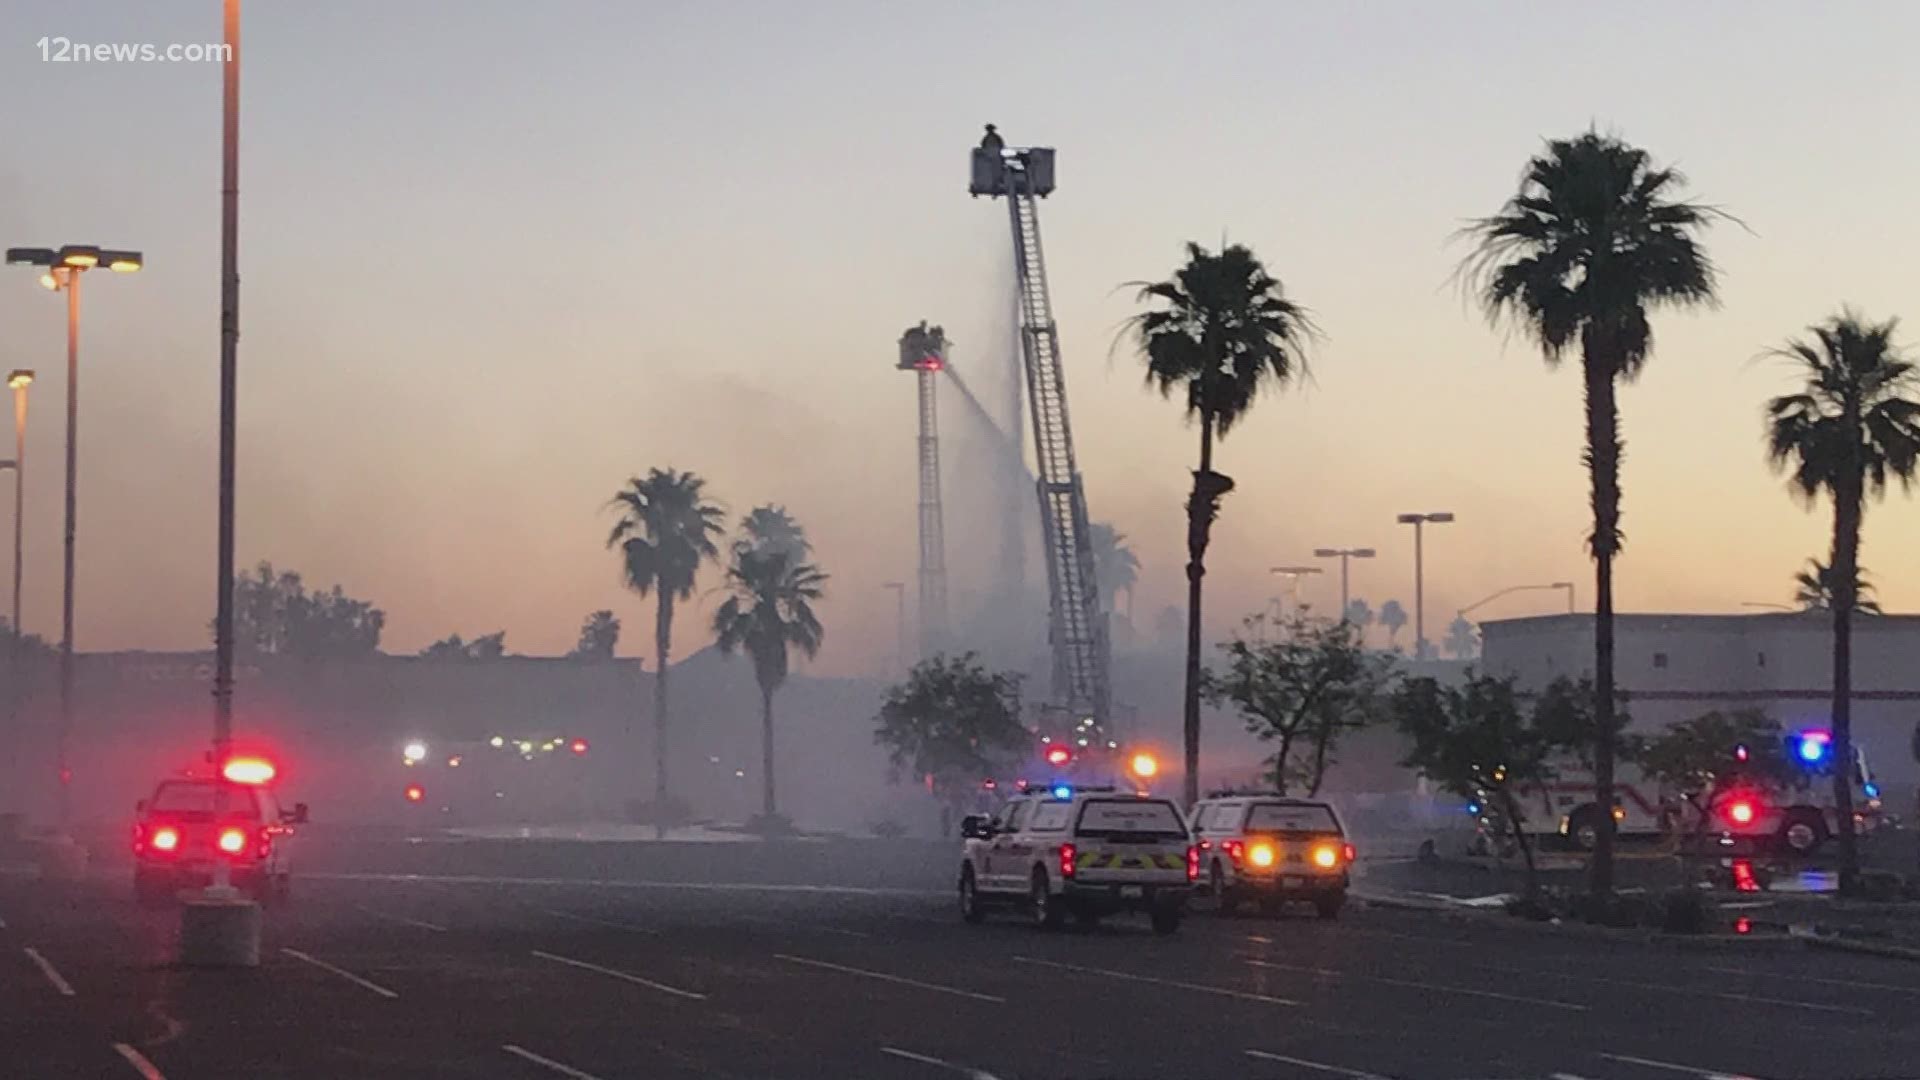 Fire crews in Mesa were battling a fire at a Sizzler restaurant near Country Club Drive and Southern Avenue early Tuesday.